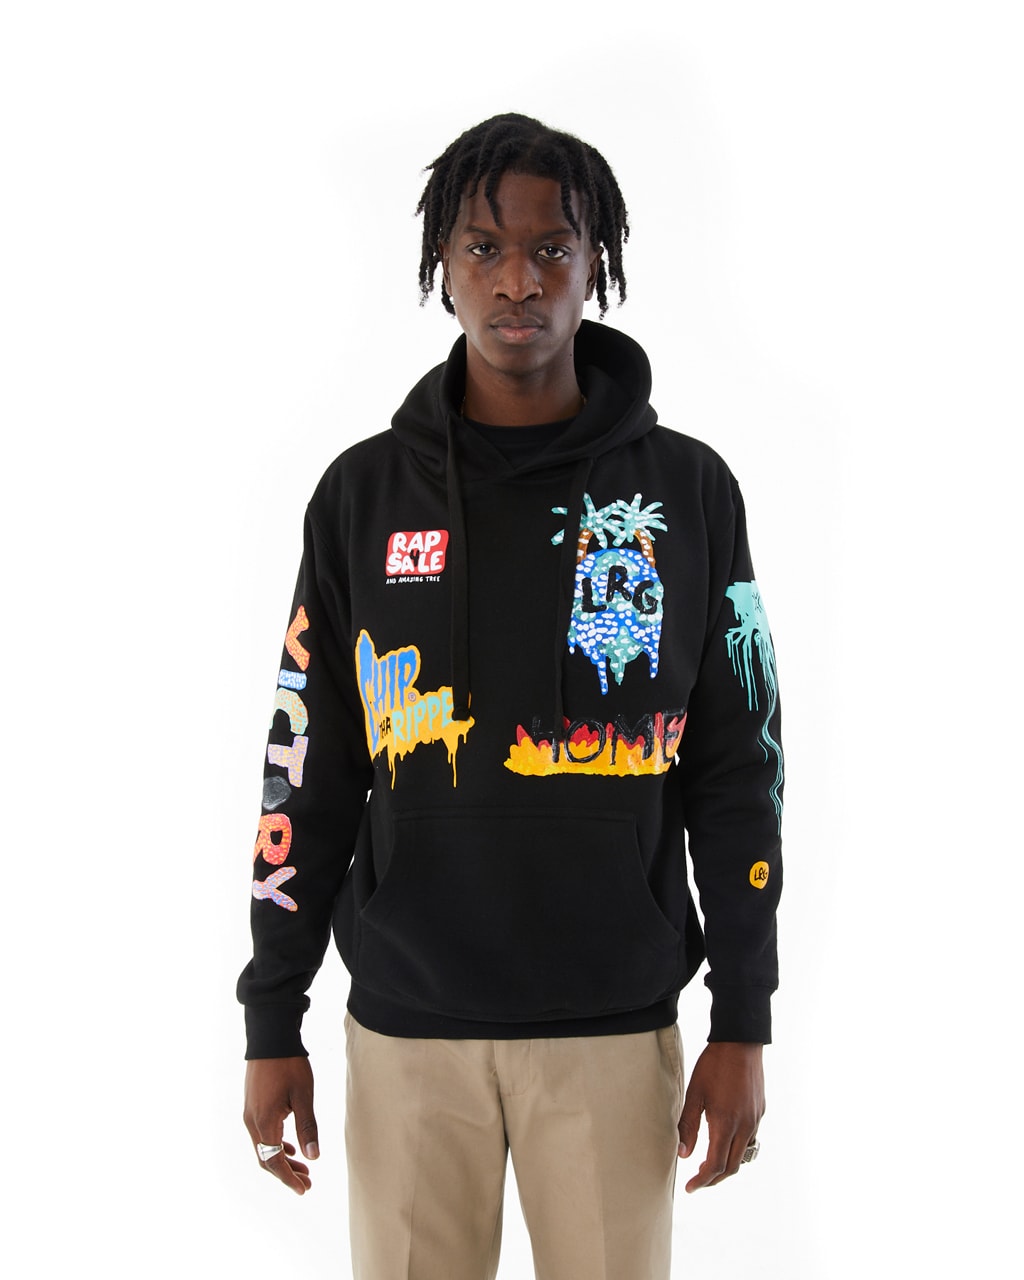 Chip Tha Ripper x LRG Capsule Collection of hoodies and t-shirts nicholas mayfield